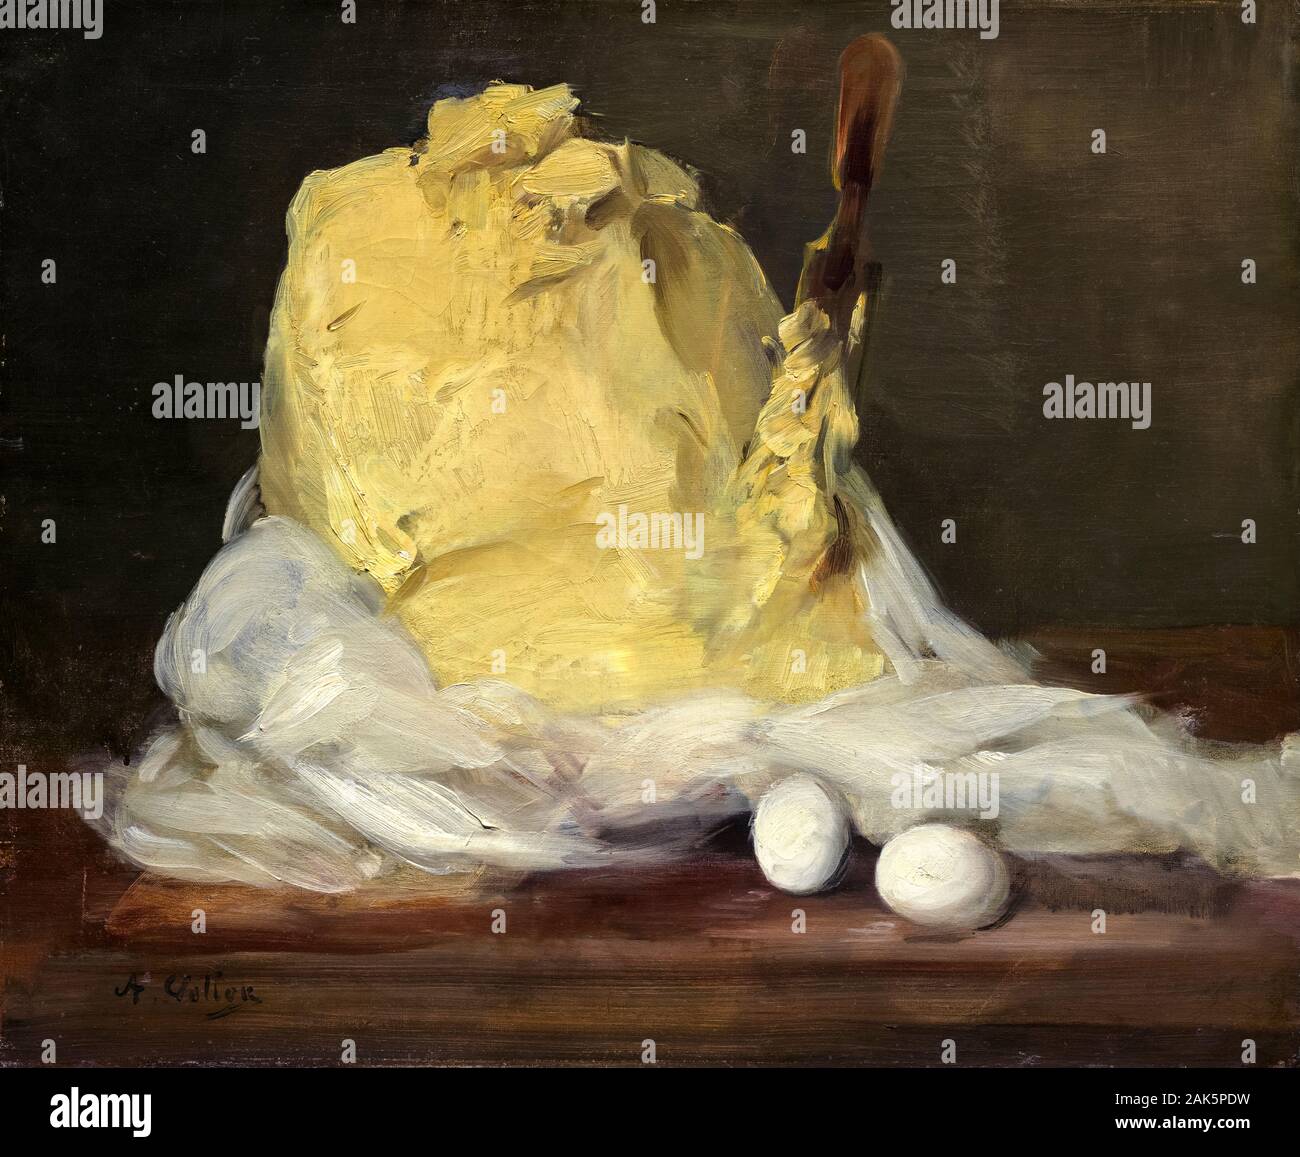 Antoine Vollon, Mound of Butter, still life painting, 1875-1885 Stock Photo